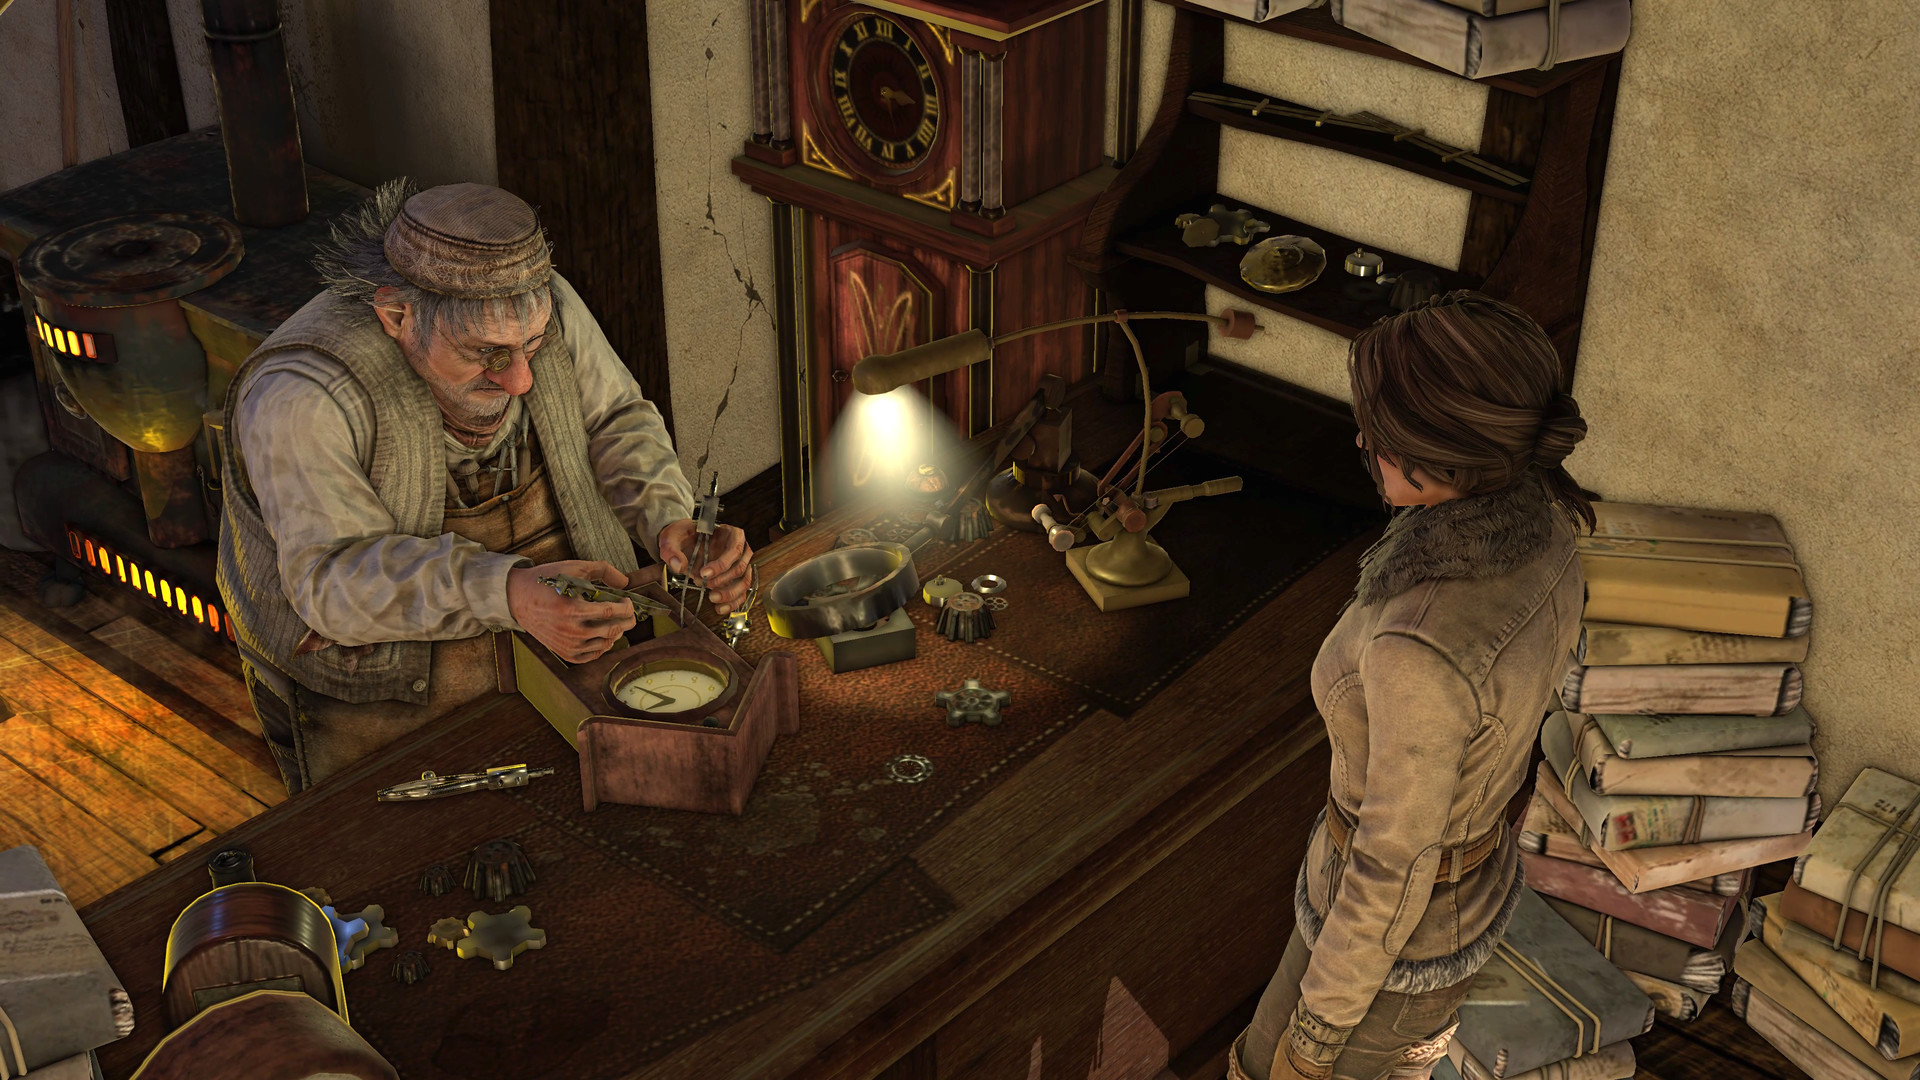 Save 80% on Syberia 3 on Steam